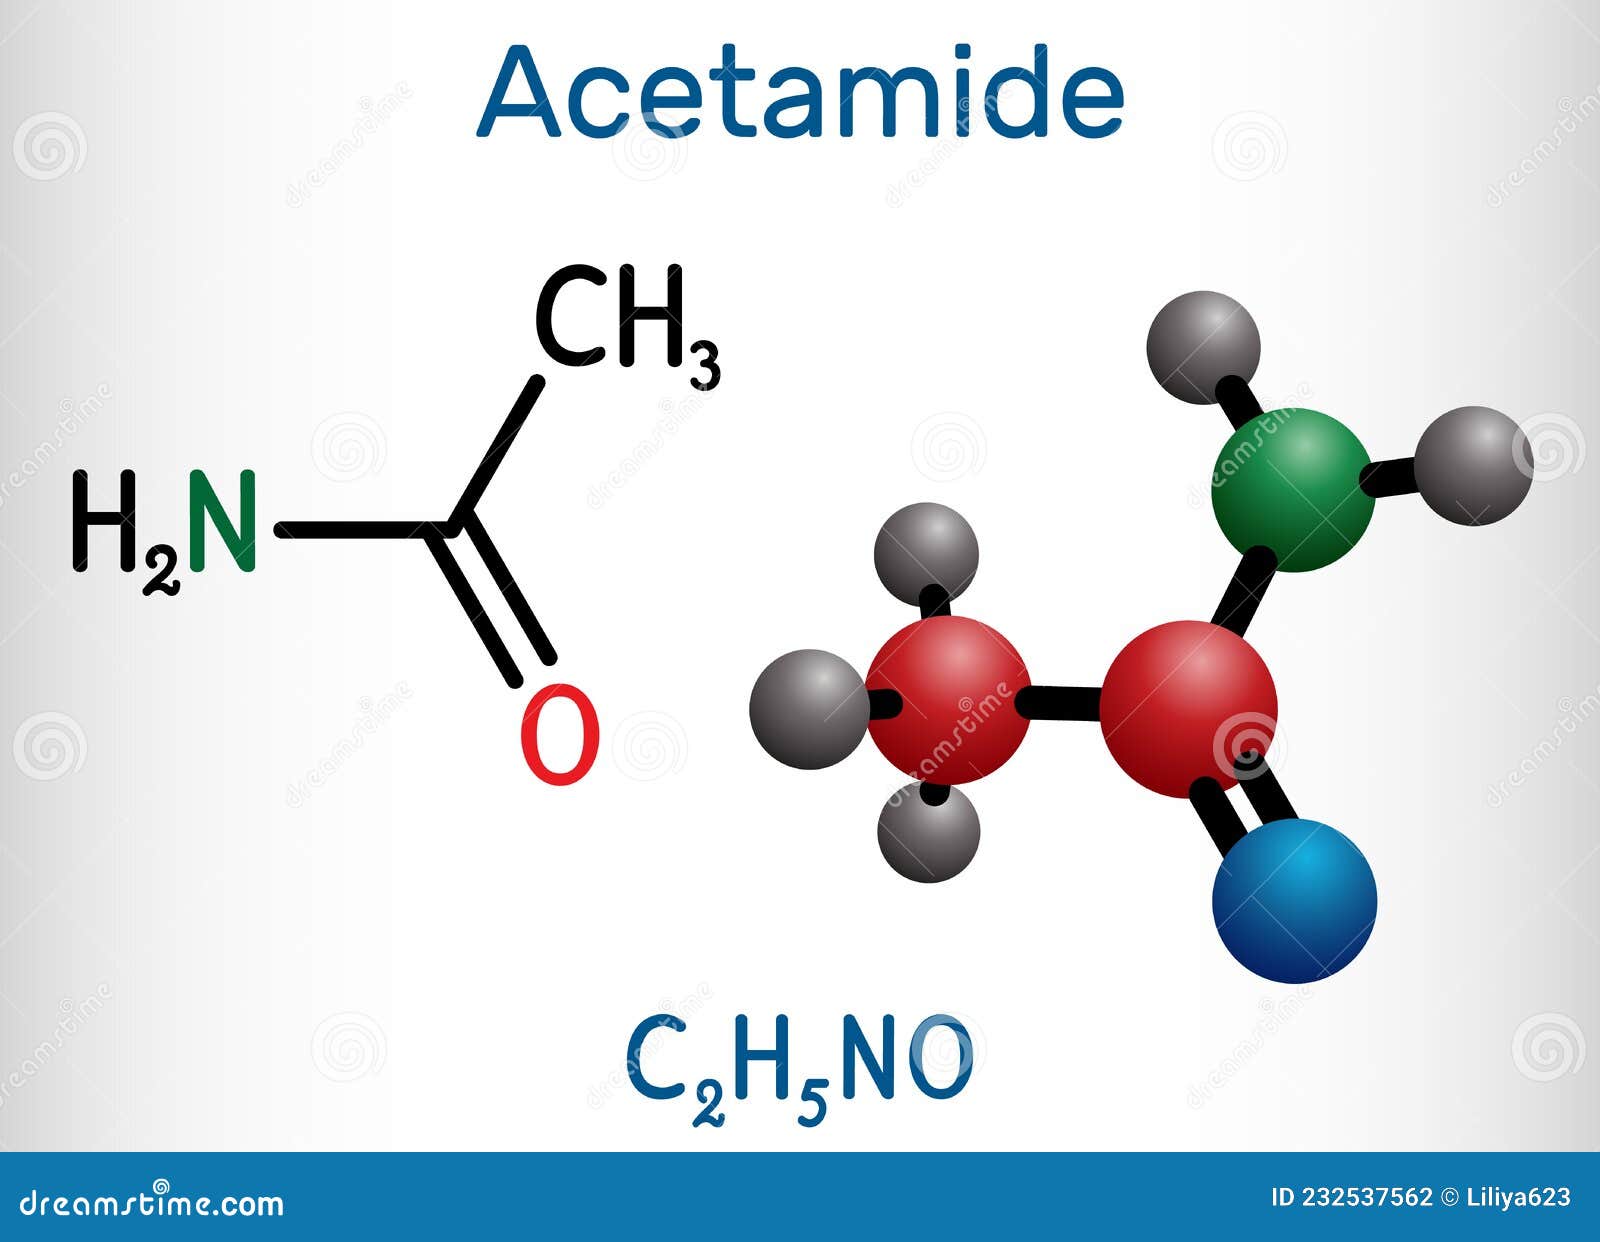 acetamide, ethanamide molecule. it is a monocarboxylic acid amide, used as plasticizer in the processes of obtaining